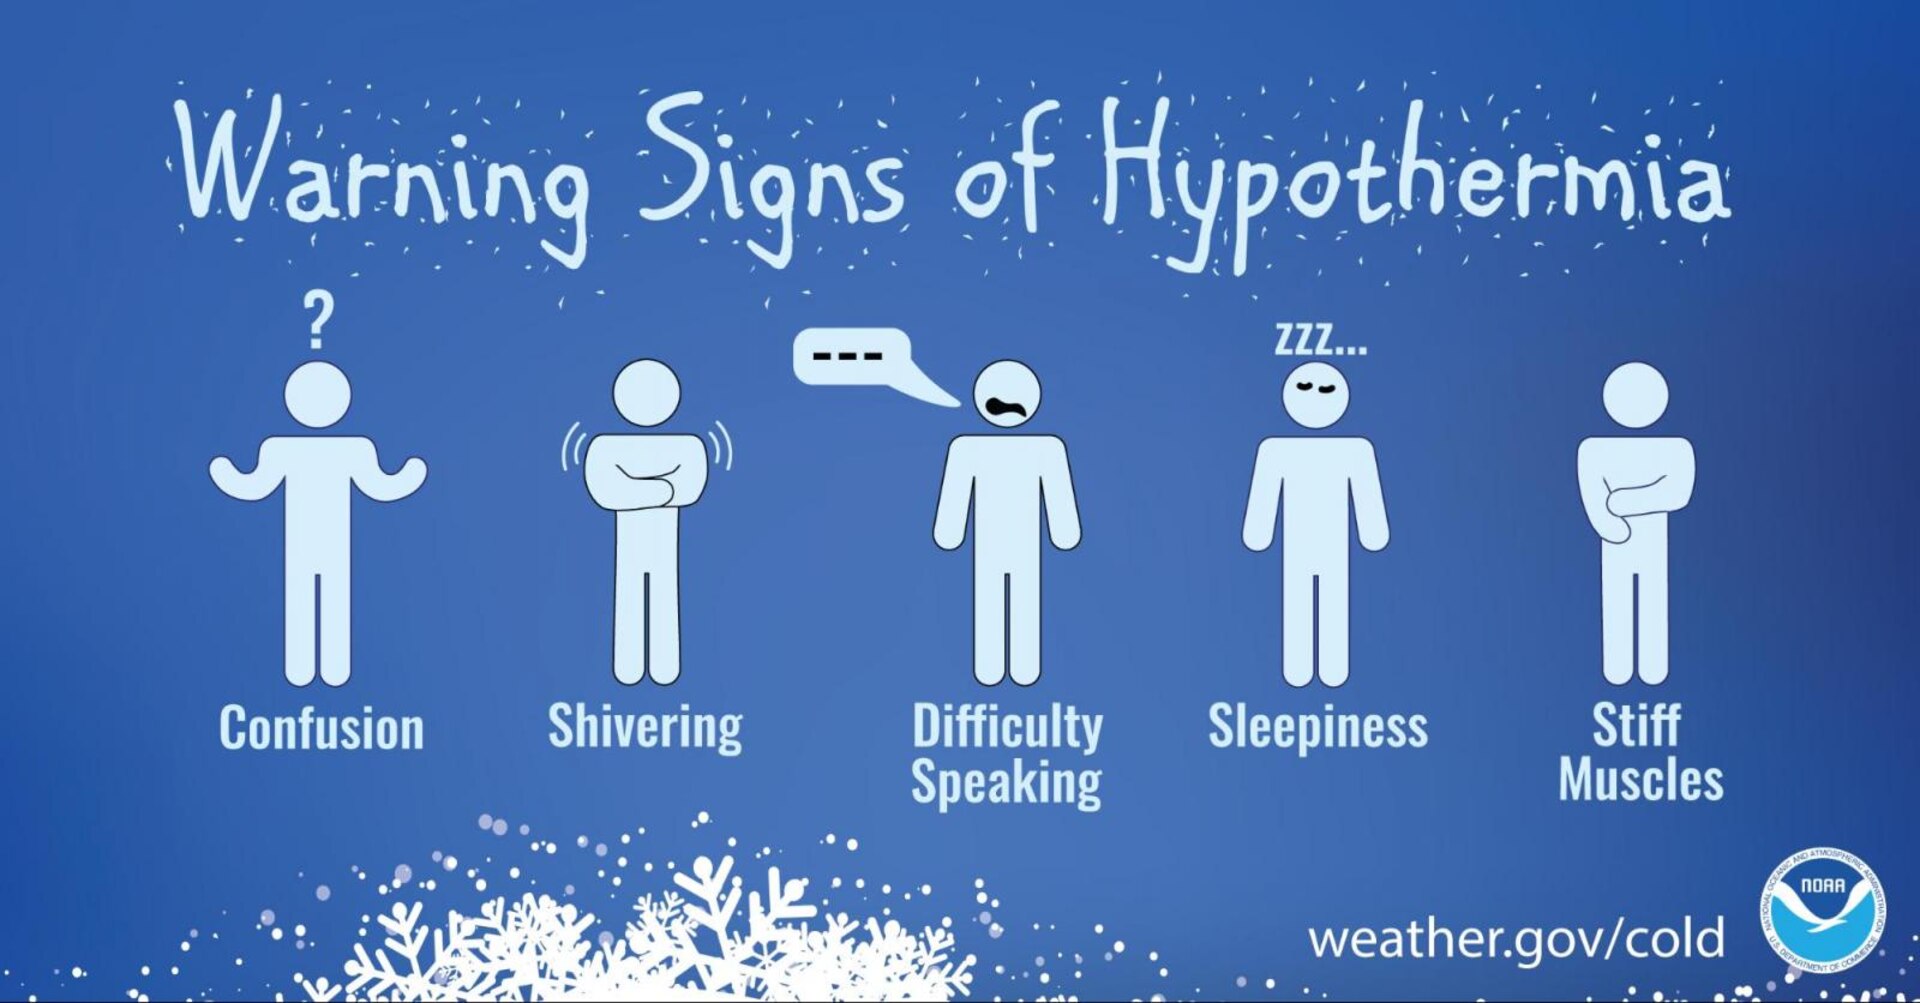 Hypothermia is a medical emergency that occurs when your body loses heat faster than it can produce heat, causing a dangerously low body temperature.